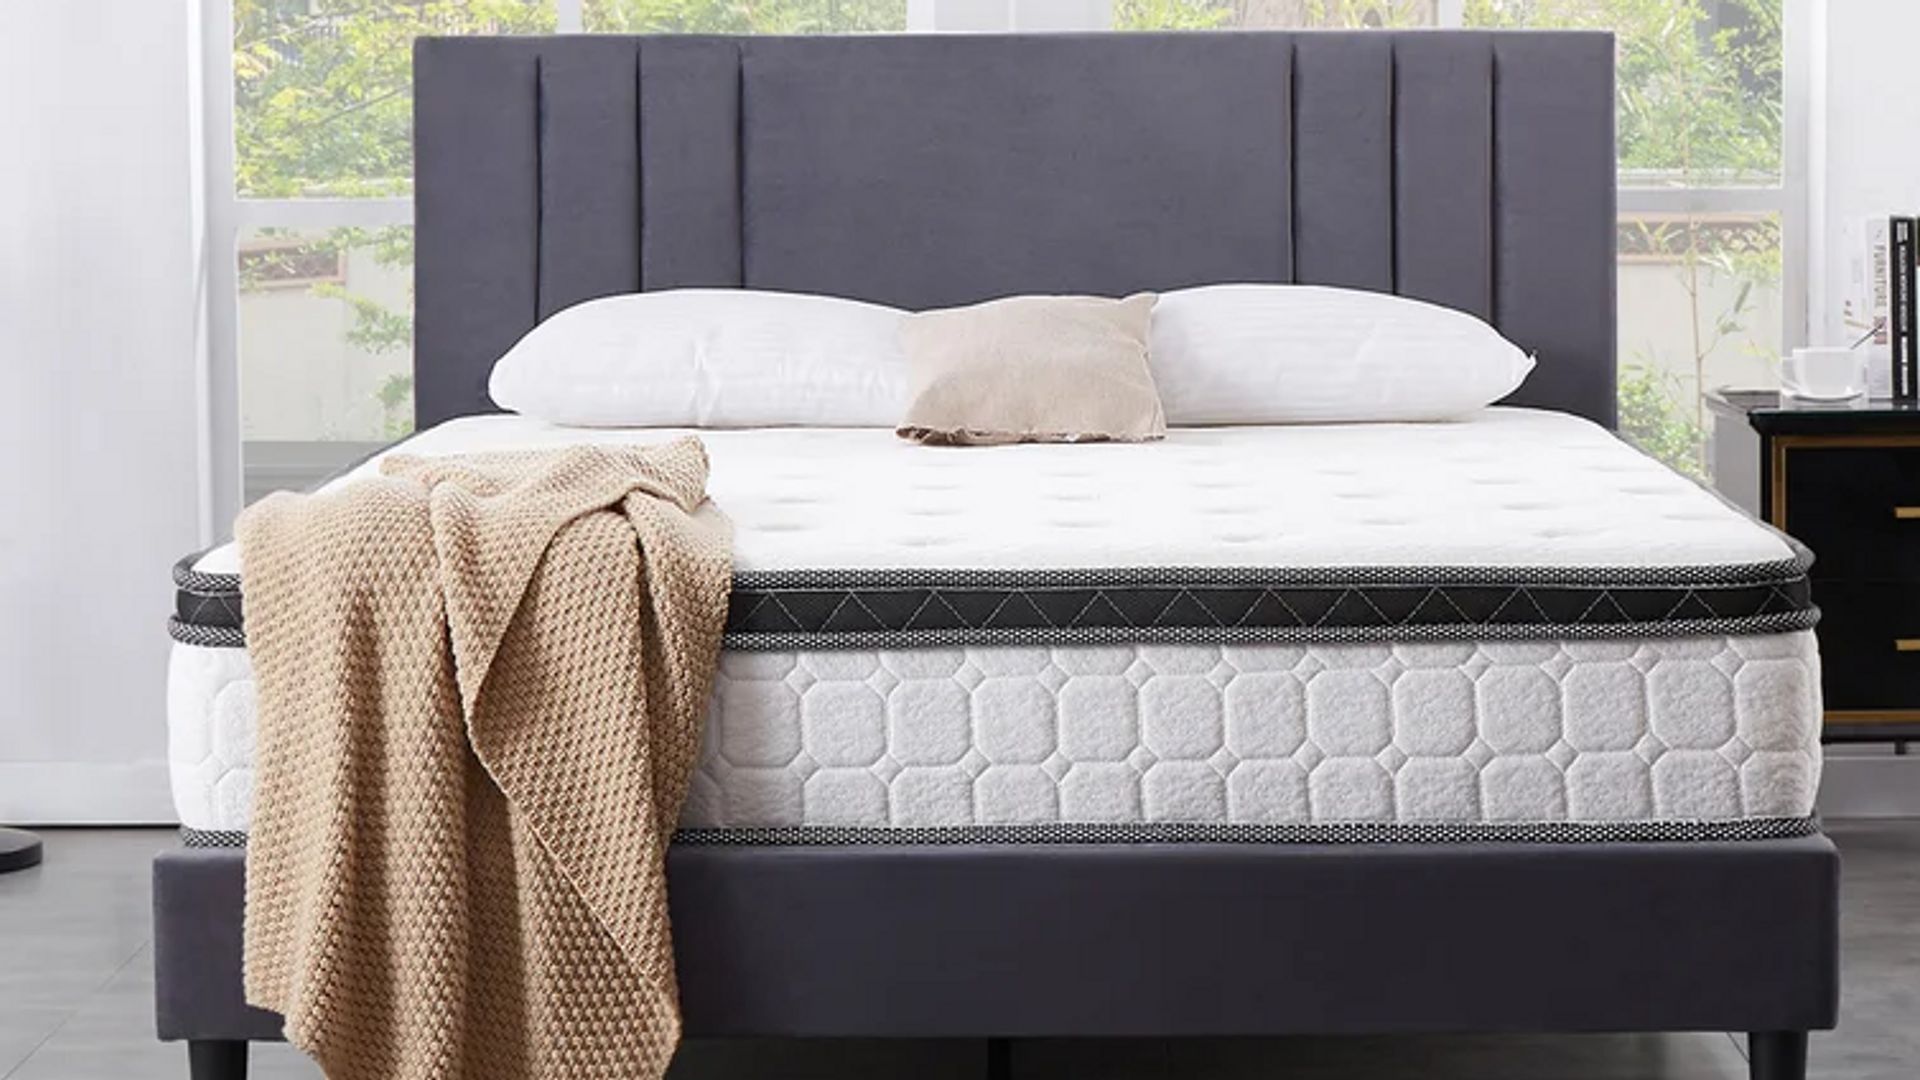 Best mattresses to shop now during the bank holiday sales